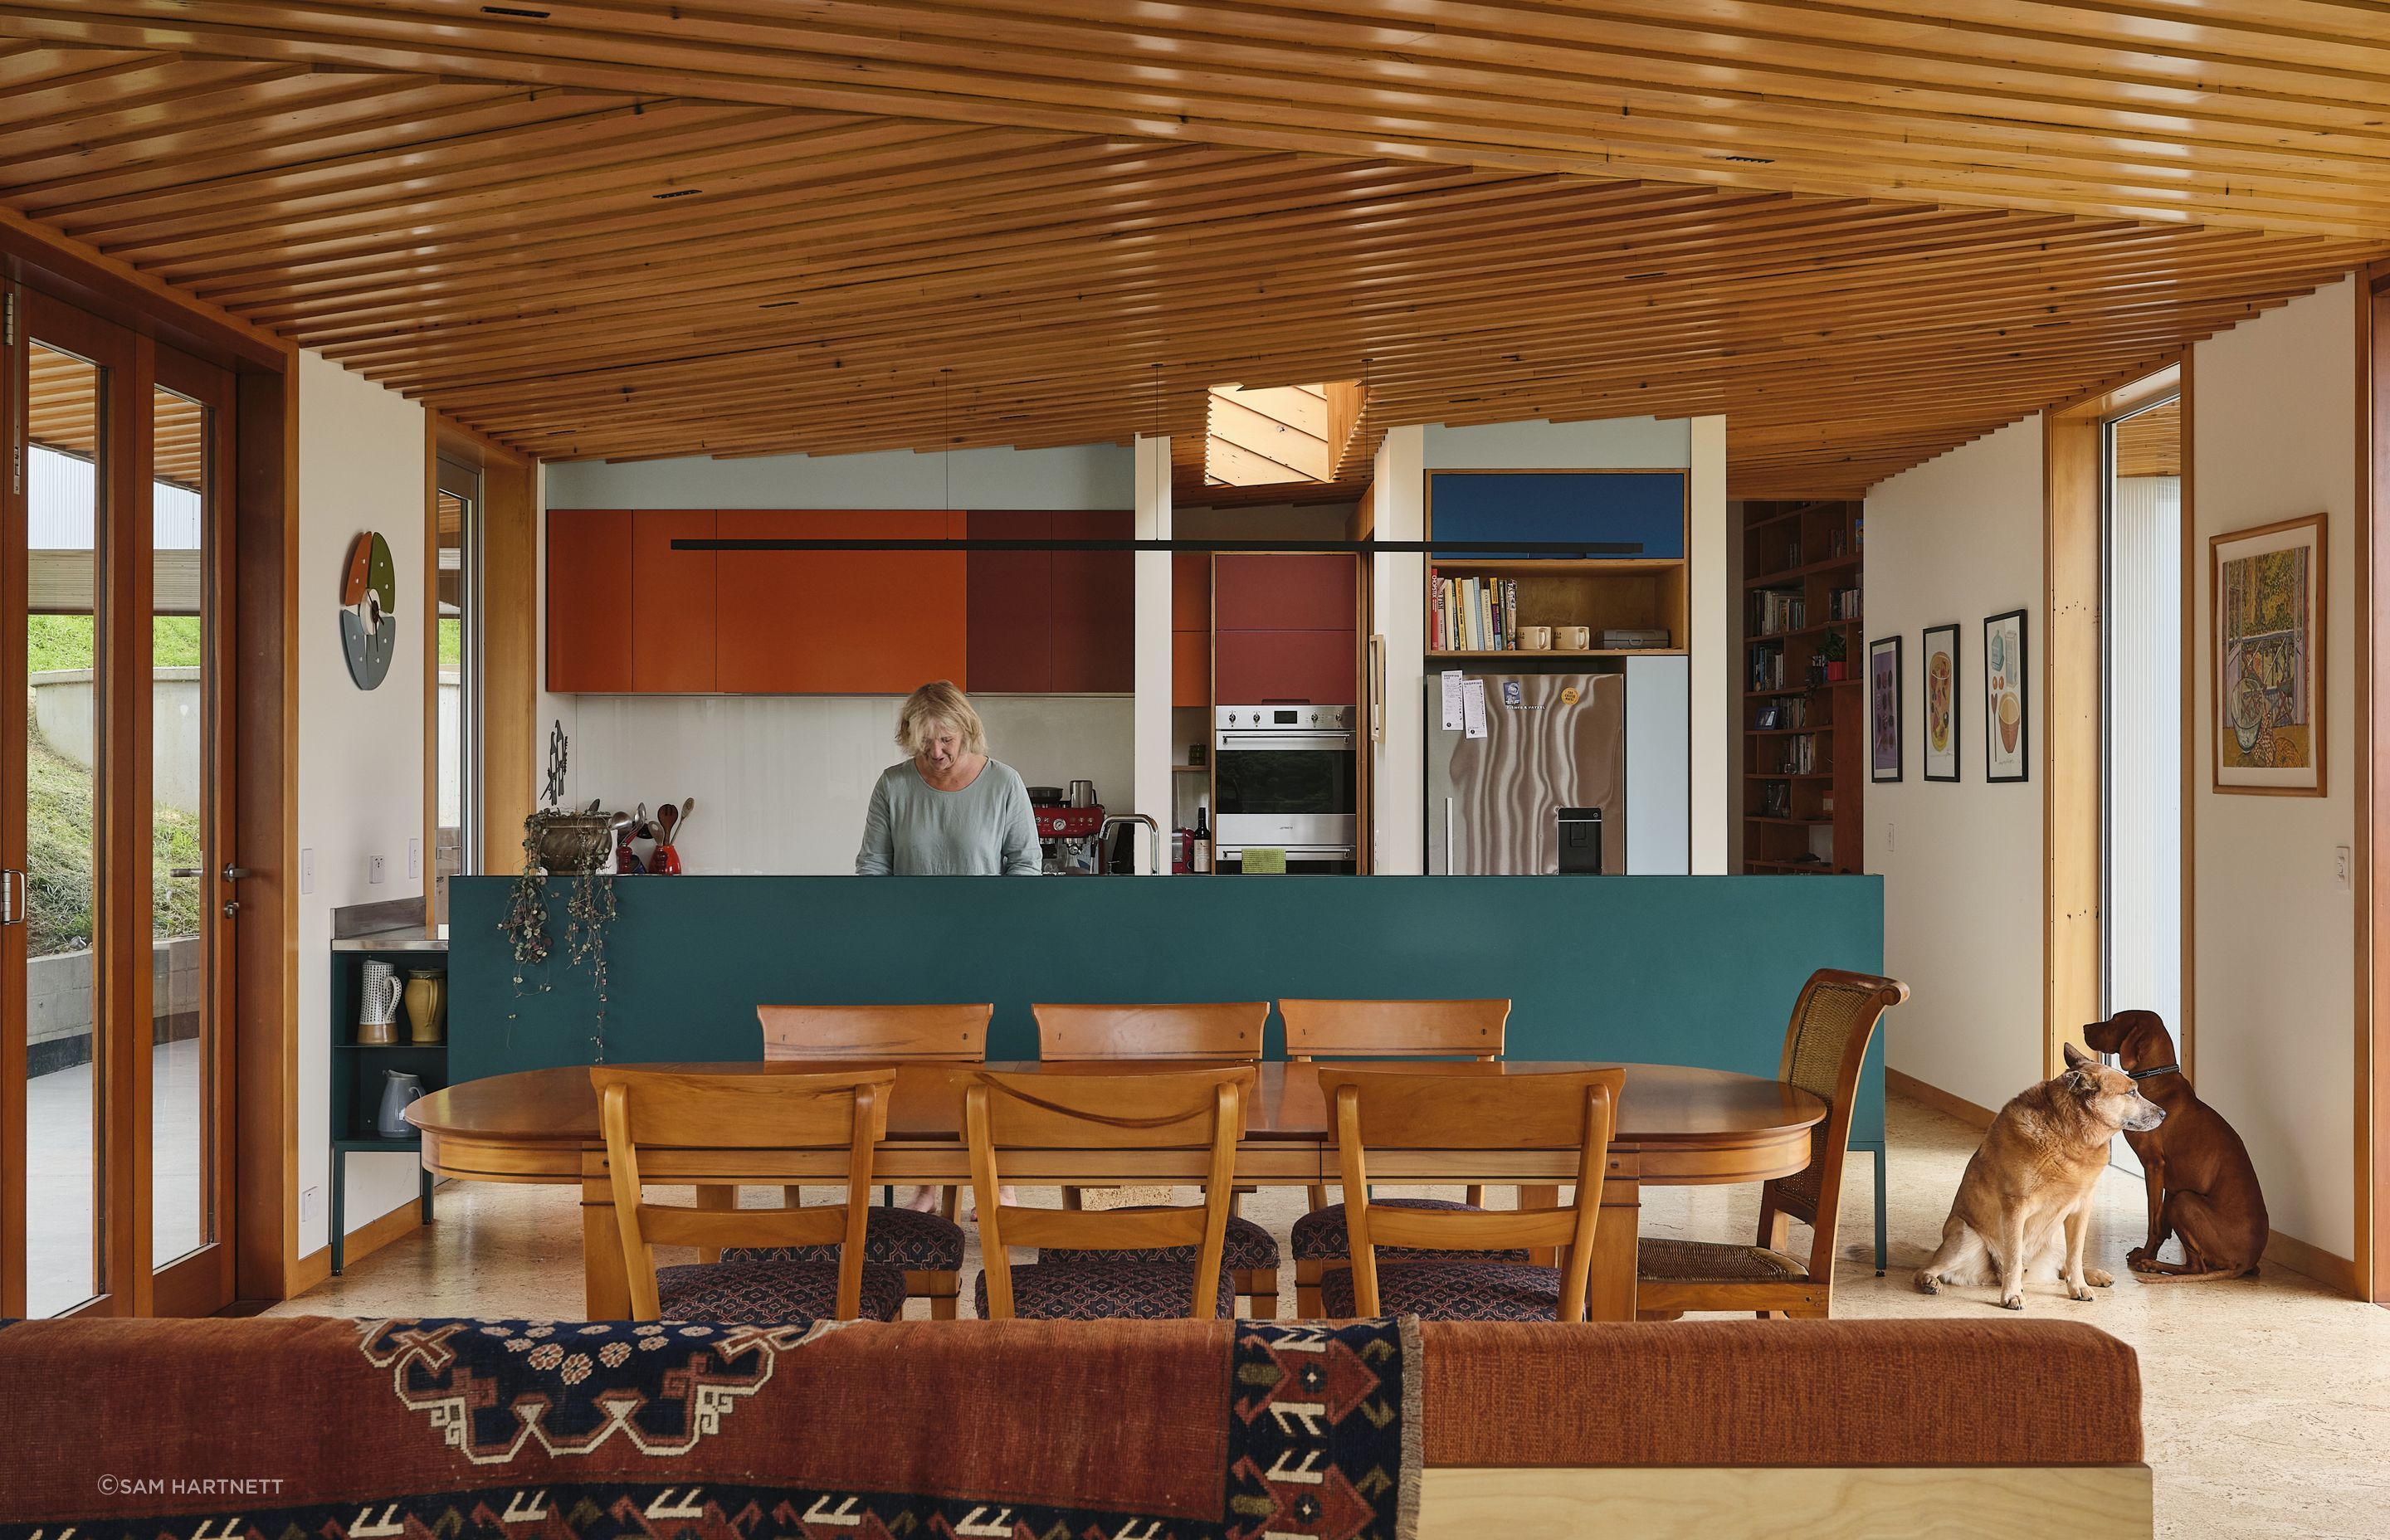 The warmth of the kauri battens and cork floor is complemented by the bursts of colour in the kitchen.